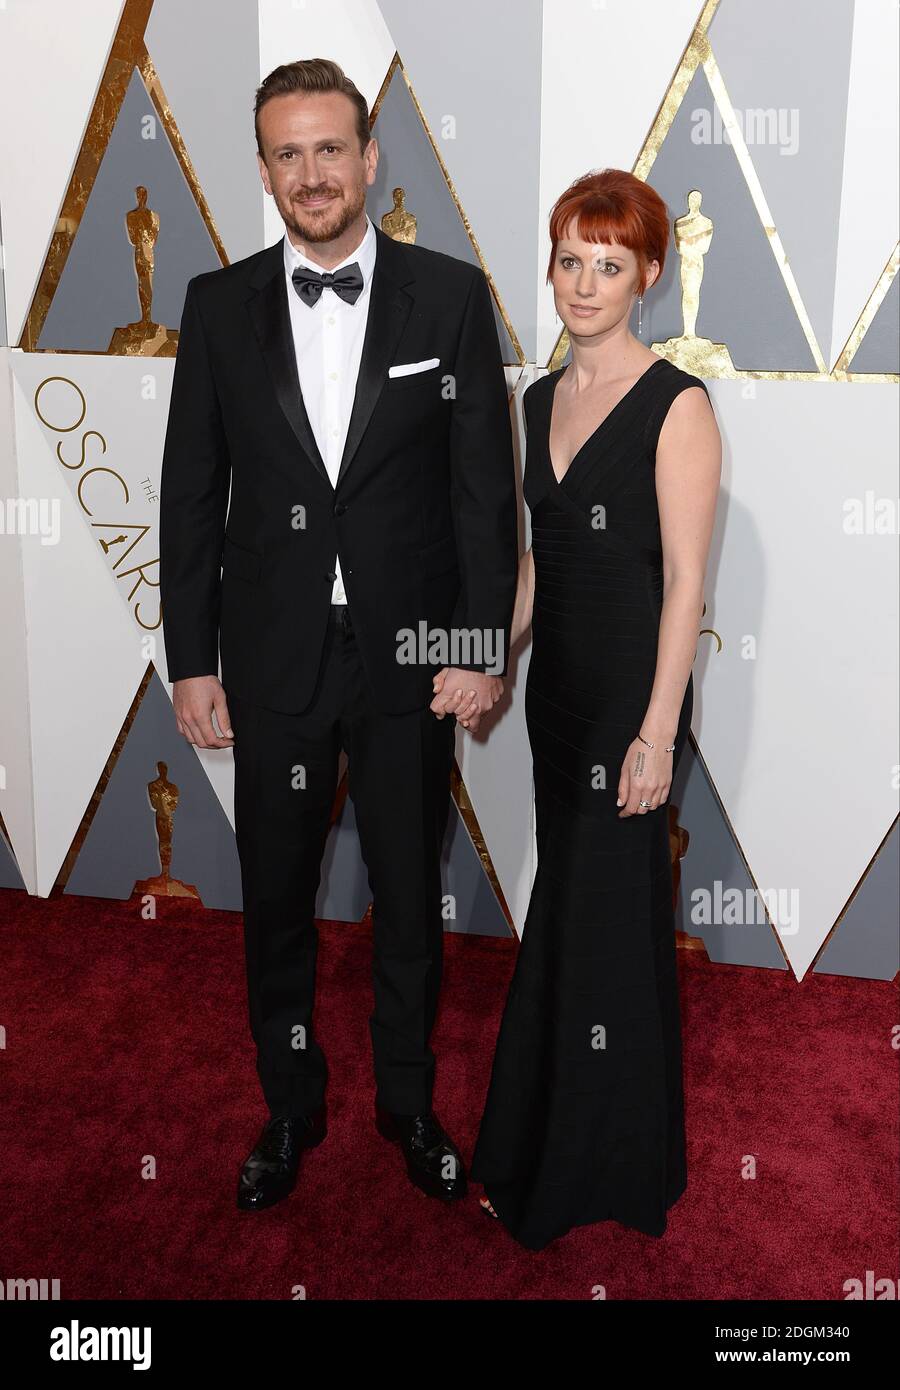 Jason Segel, left, and Alexis Mixter arriving at the 88th Academy Awards held at the Dolby Theatre in Hollywood, Los Angeles, CA, USA, February 28, 2016. Stock Photo